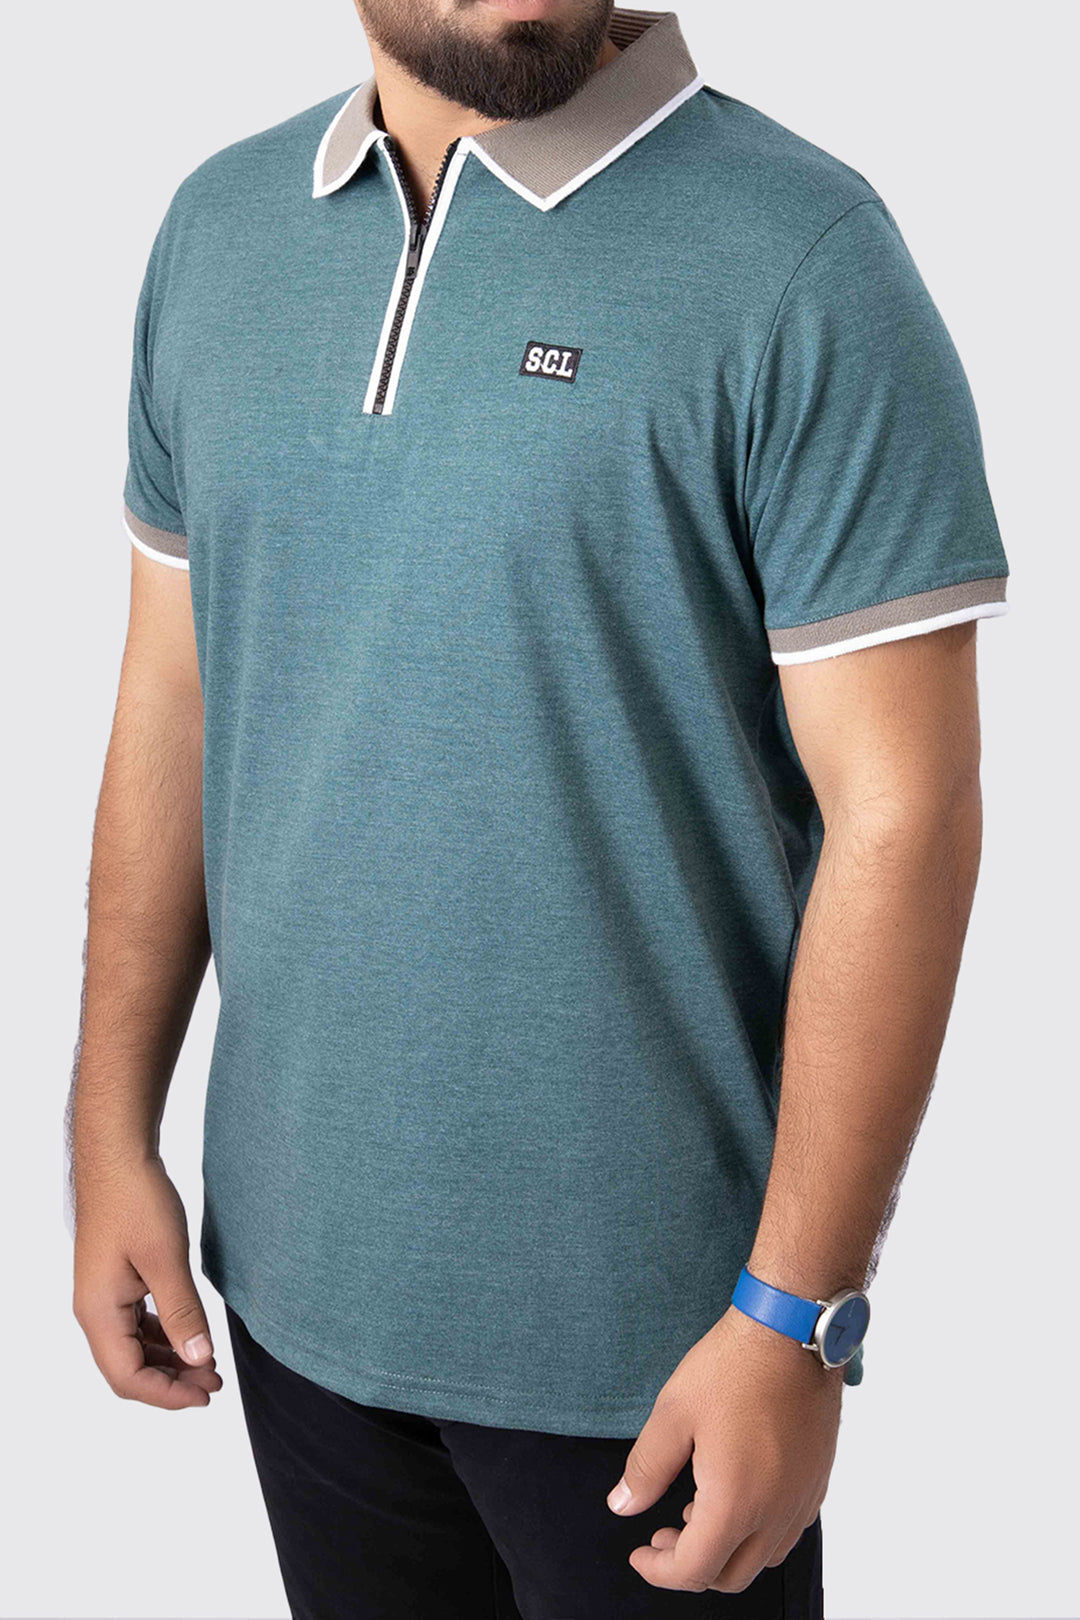 Teal Melange Contrast Zipper Embroidered Polo Shirt - A23 - MP0211R